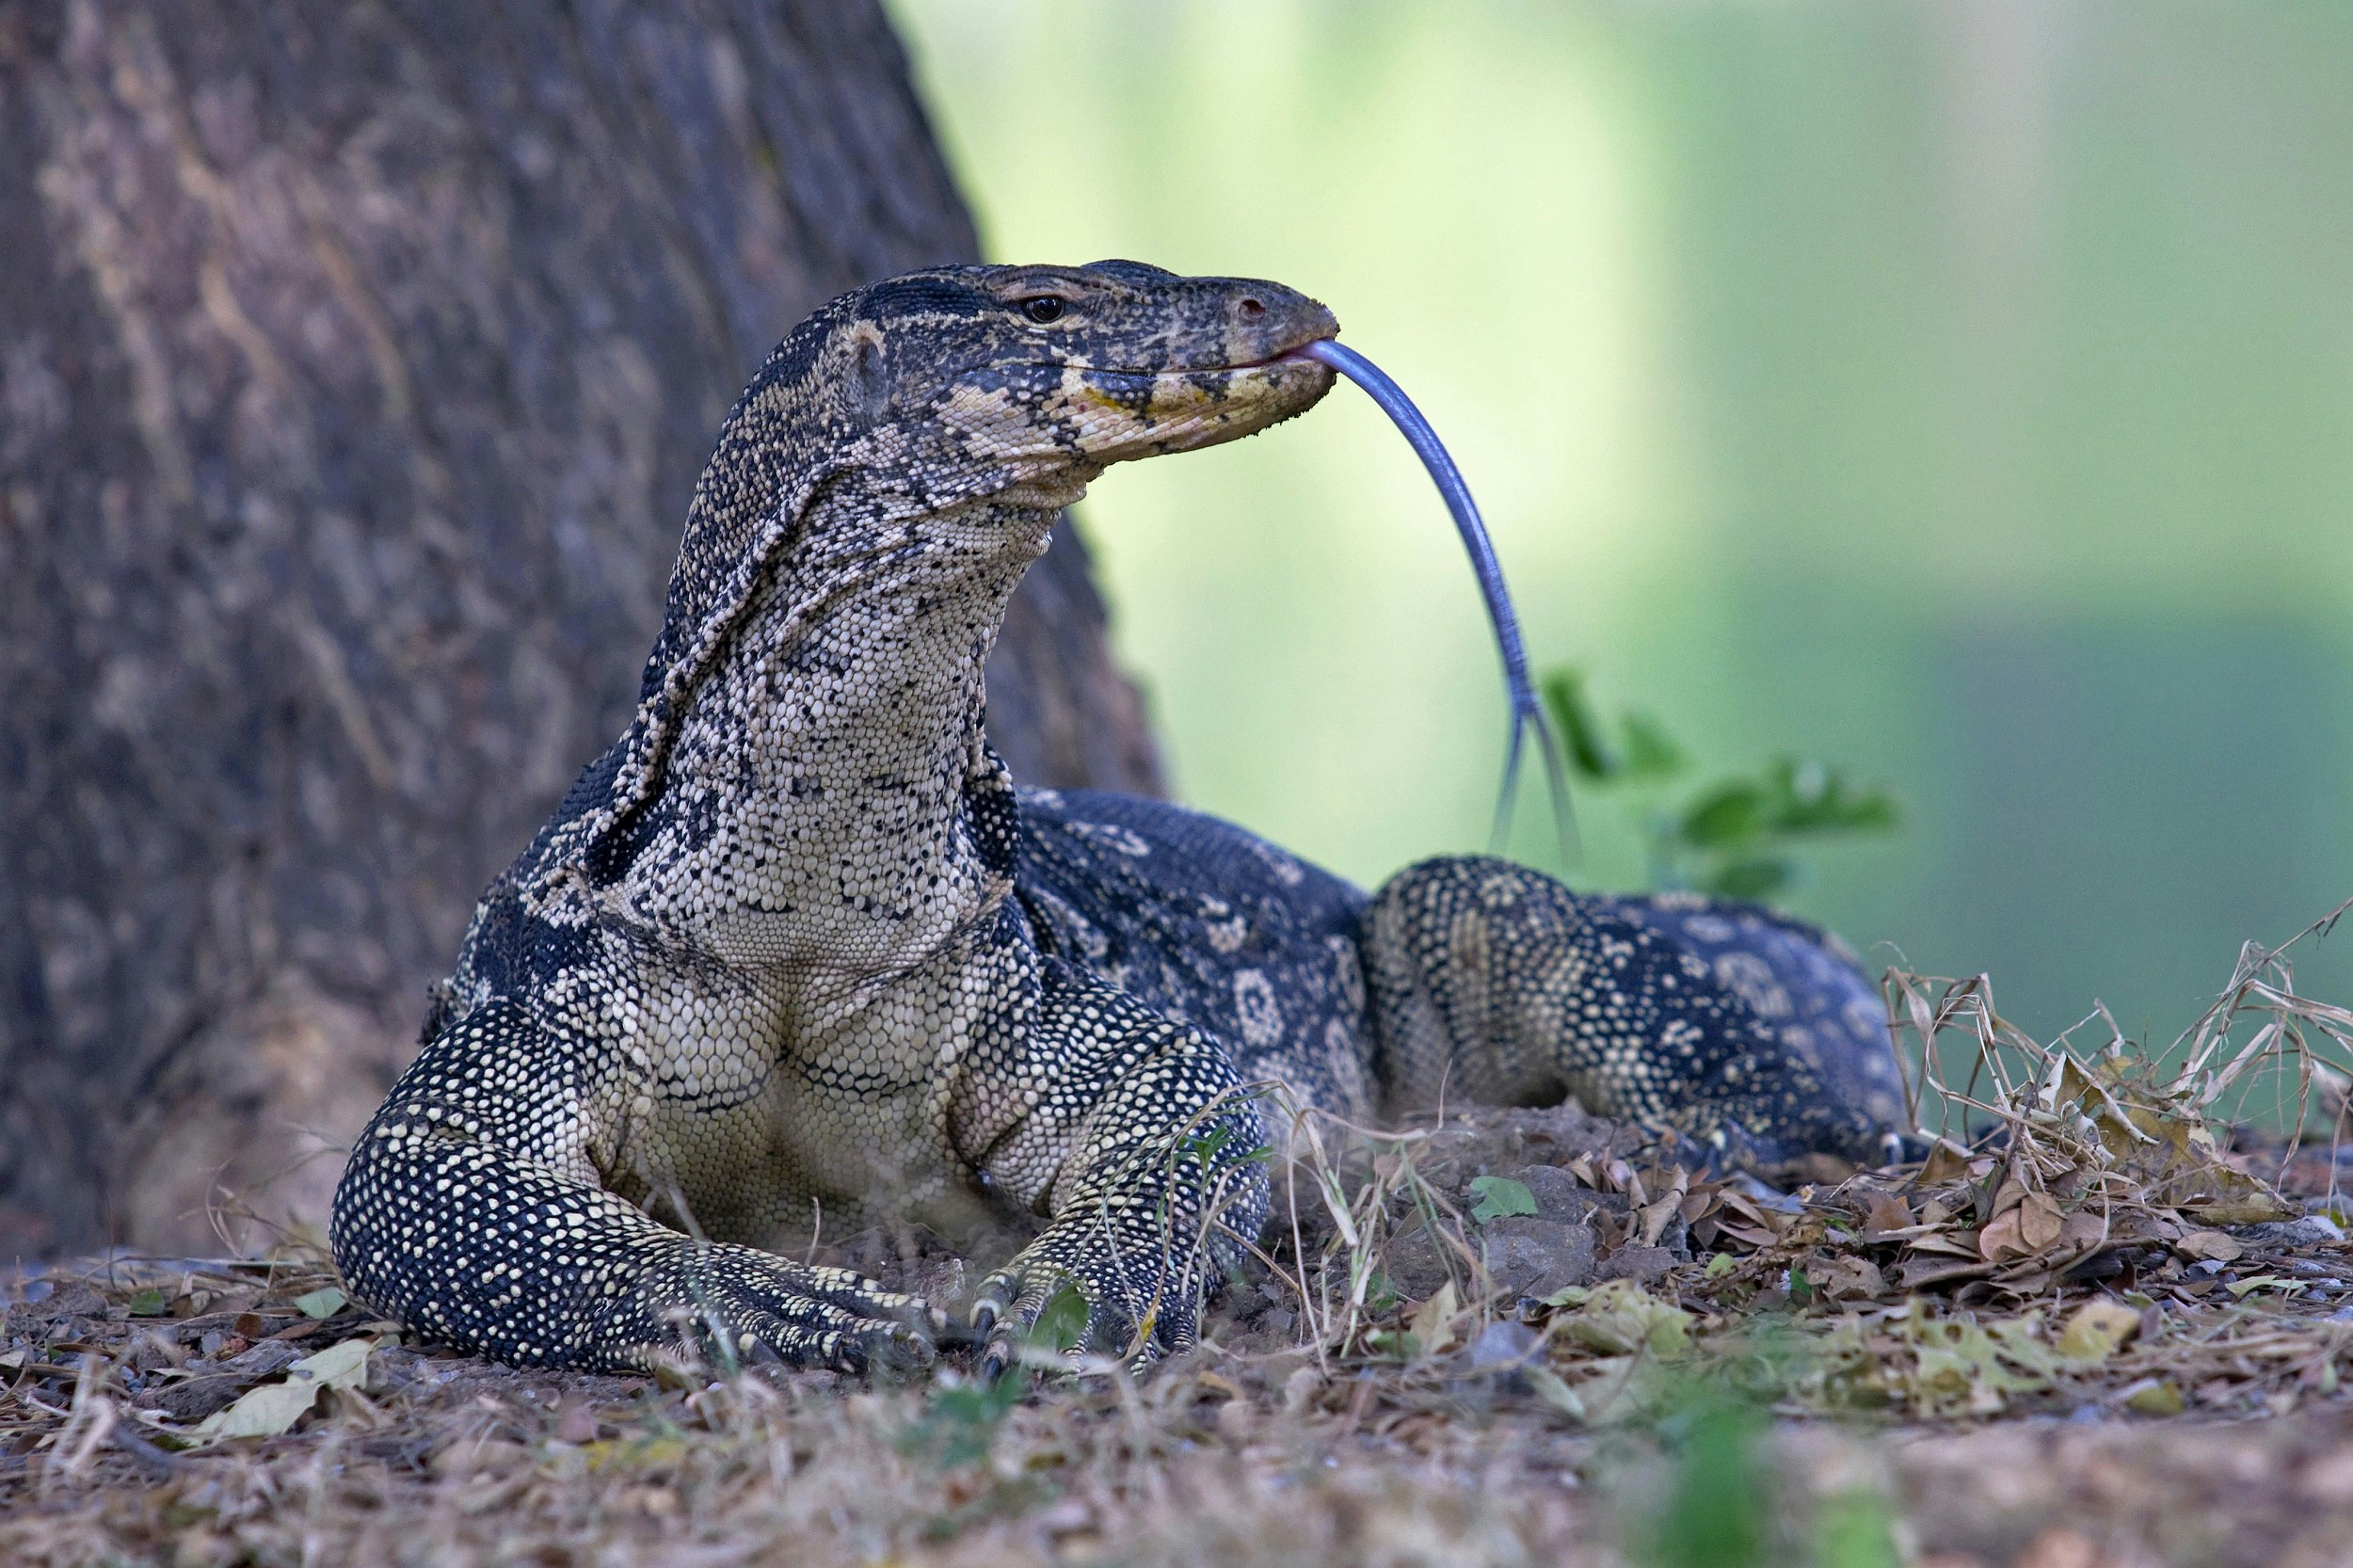 A large water monitor lizard laid out at the bottom of a tree; its huge forked tongue is outstretched from its mouth and is almost touching the ground.